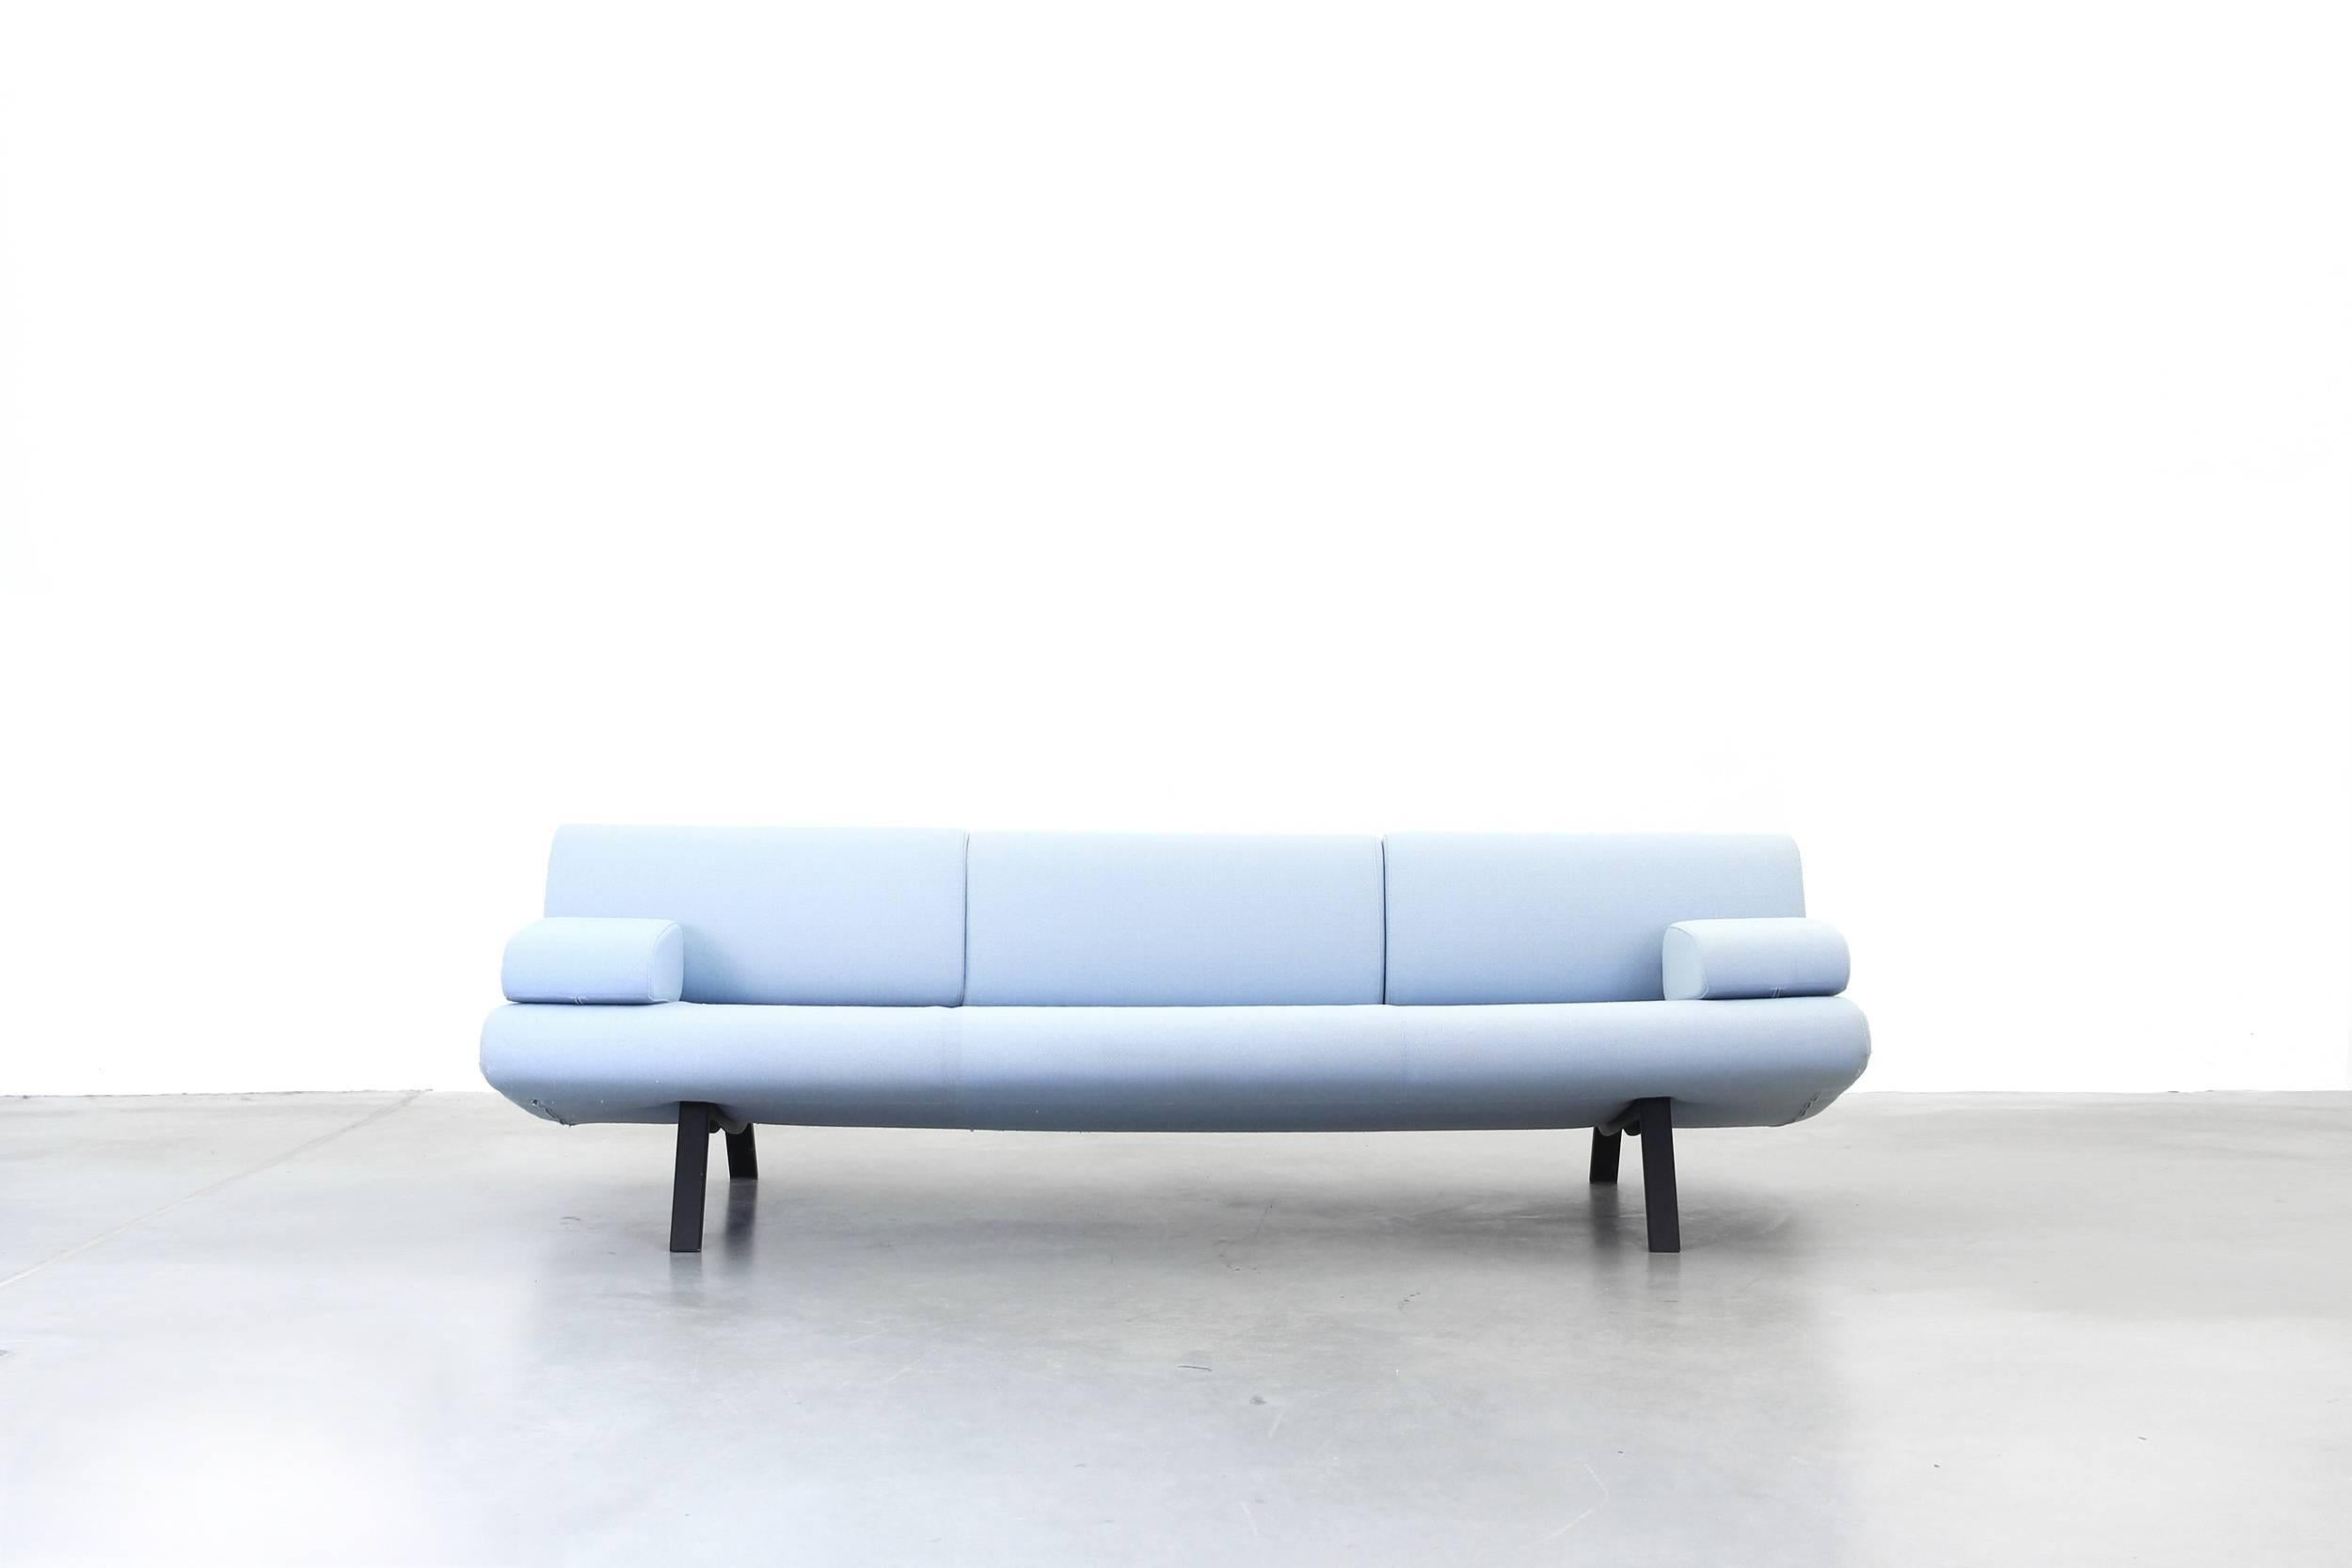 This beautiful sofa was designed by Bartholin and Ernst for Erik Jorgensen in 2009, made in Denmark. The sofa is still in a very good condition with little signs of use and little abrasions on one edge (see picture).

We ship worldwide. Please do